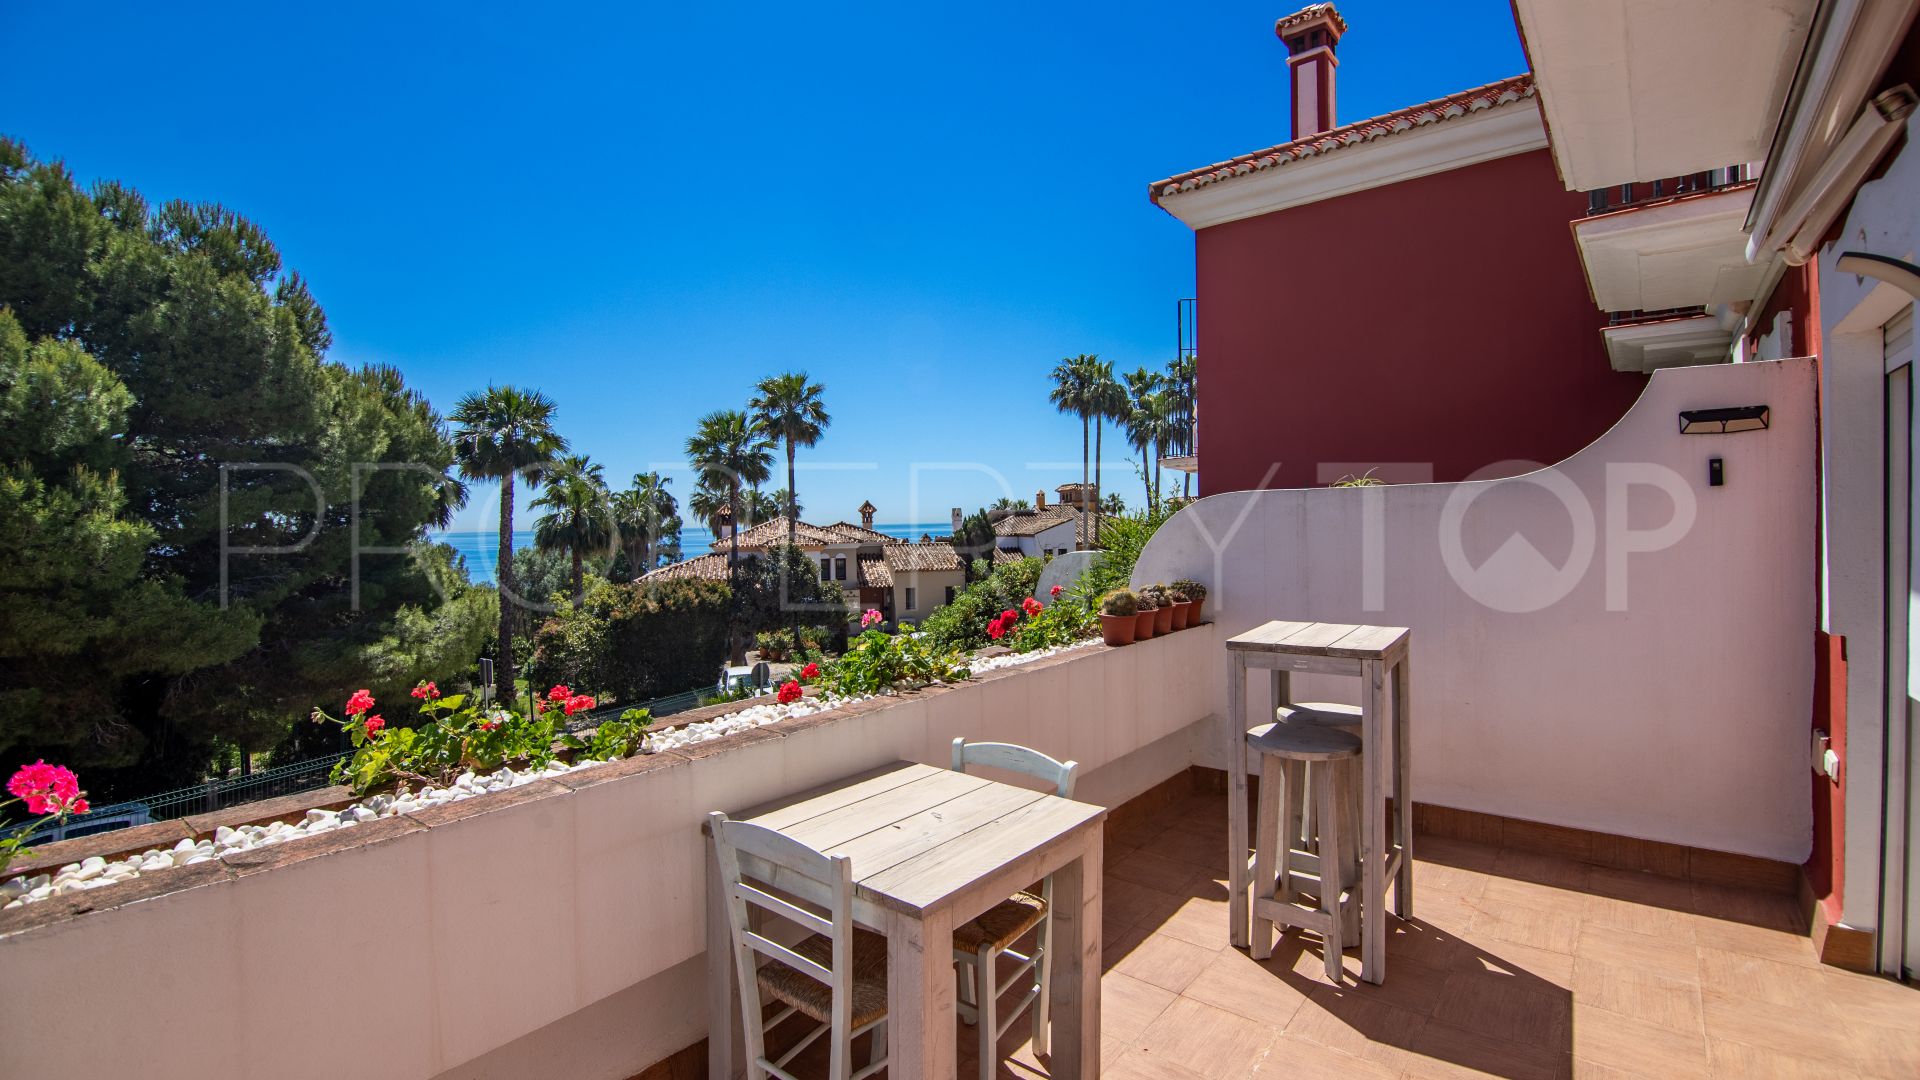 For sale town house in Alcaidesa Costa